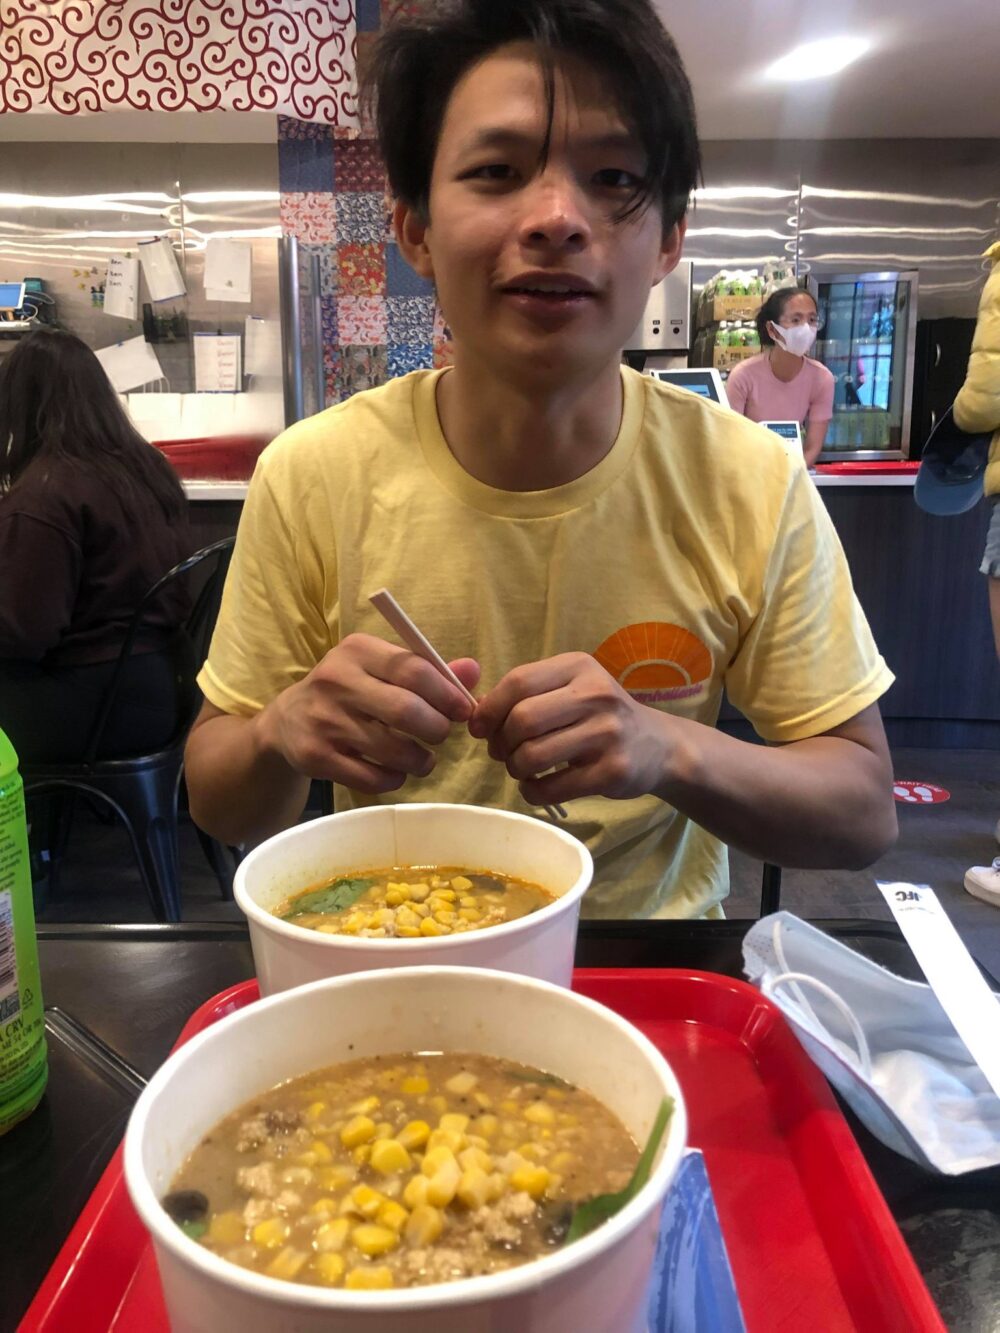 raymond with two bowls of ramen in front of him